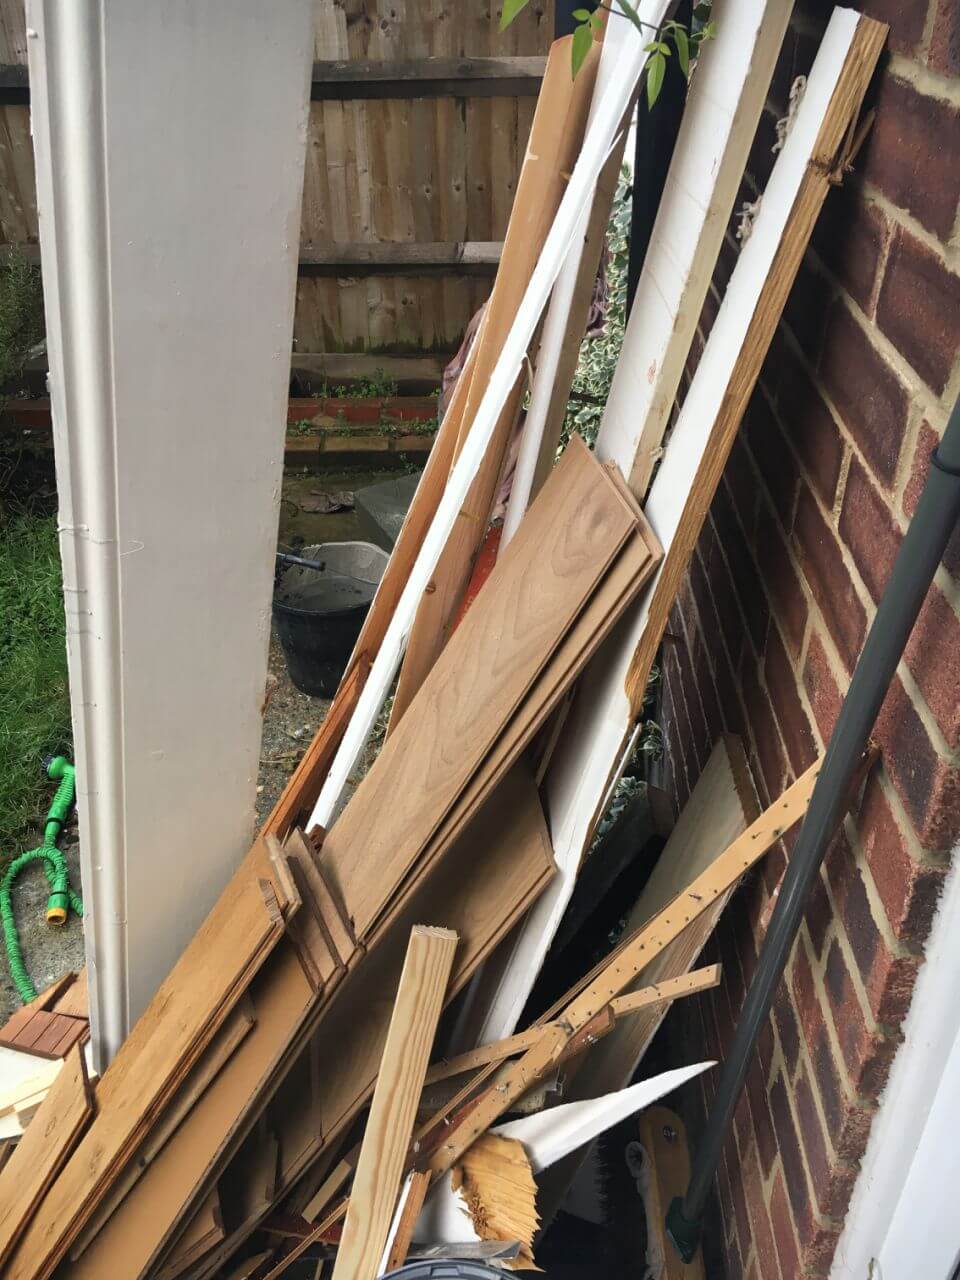 House Waste Recycling in Barnes